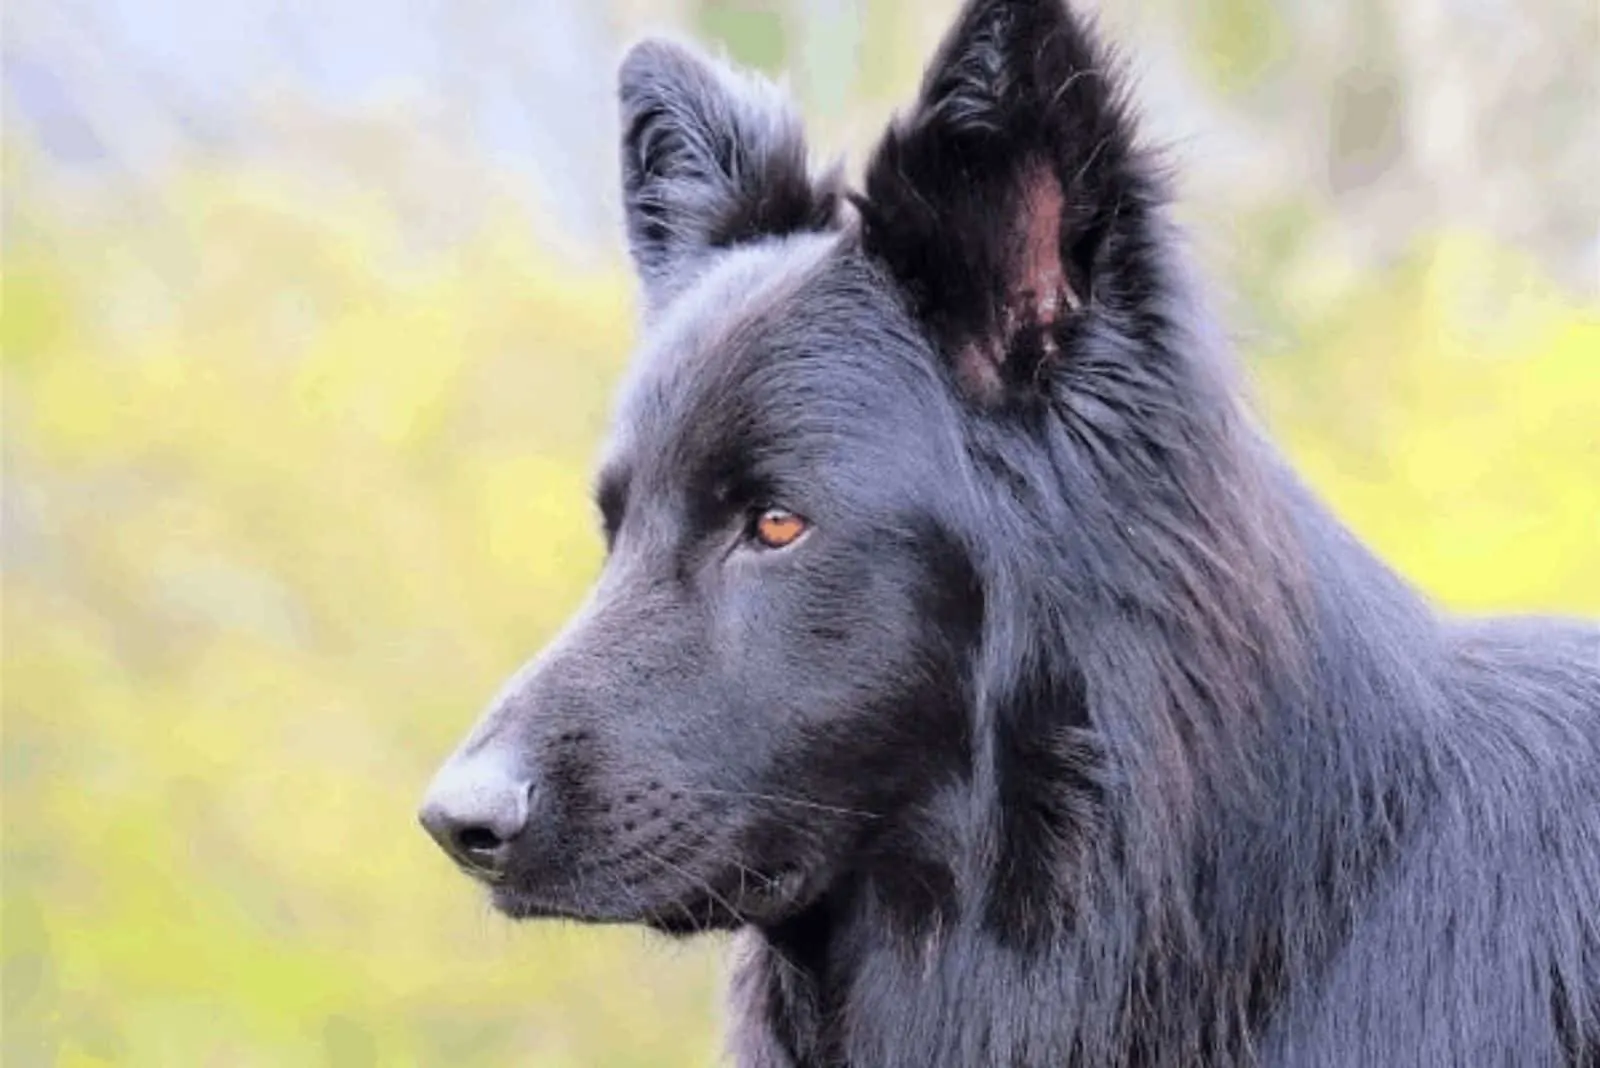 Lycan Shepherd stands and looks in front of him